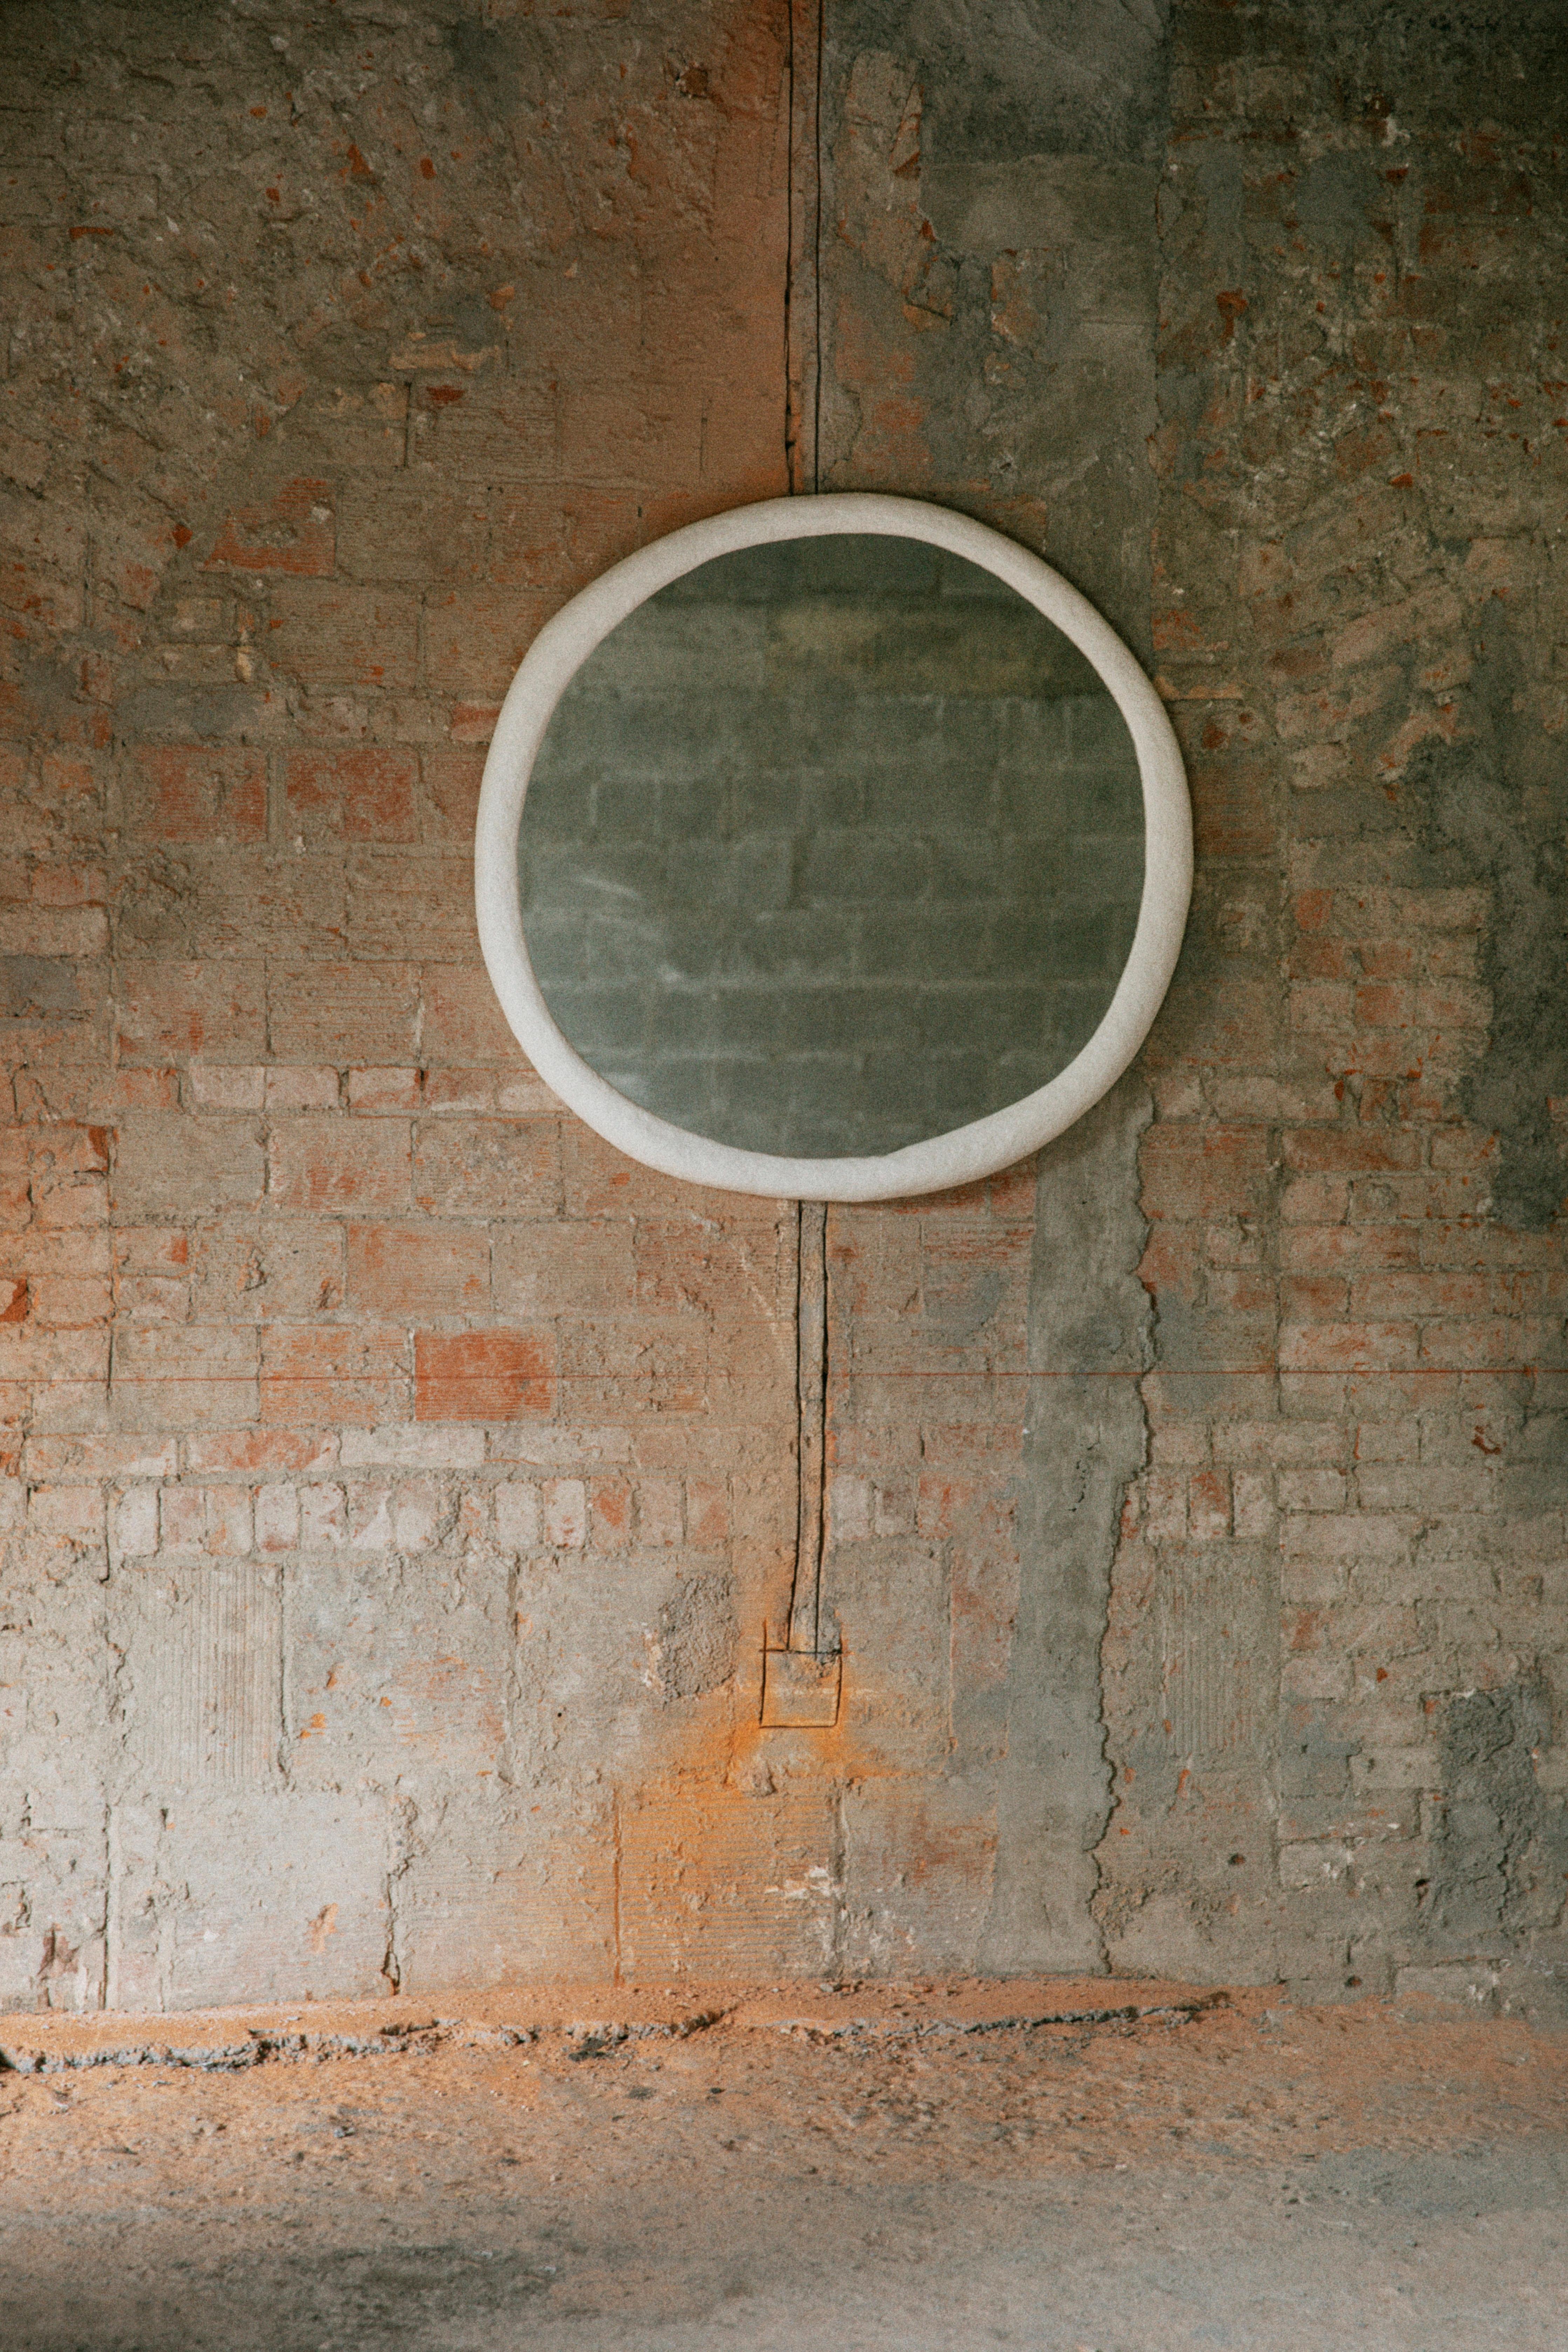 Primitivo Fantástico Umbral wall mirror by Algo Studio
Designed by Diego Garza
Dimensions: D 100 x H 9 cm
Materials: MDF, paper paste coating, plywood structure.
Available finishes: Urethane paint or automotive lacquer.

Latest pieces of work